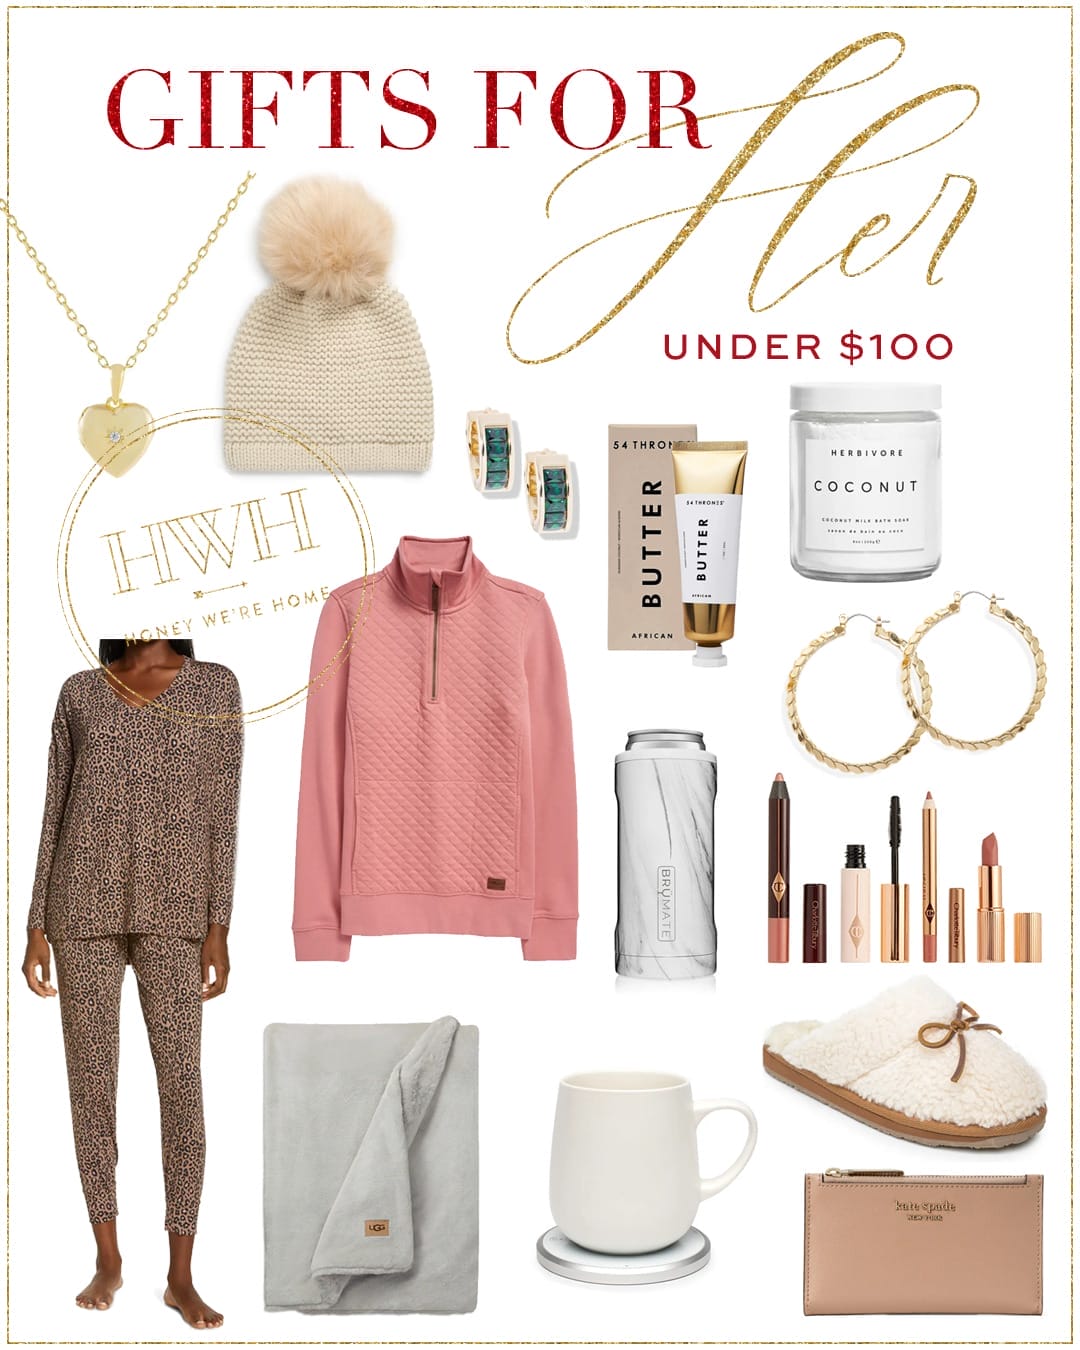 Just (the BEST) Sales & Gifts for Her Under $100 – Honey We're Home